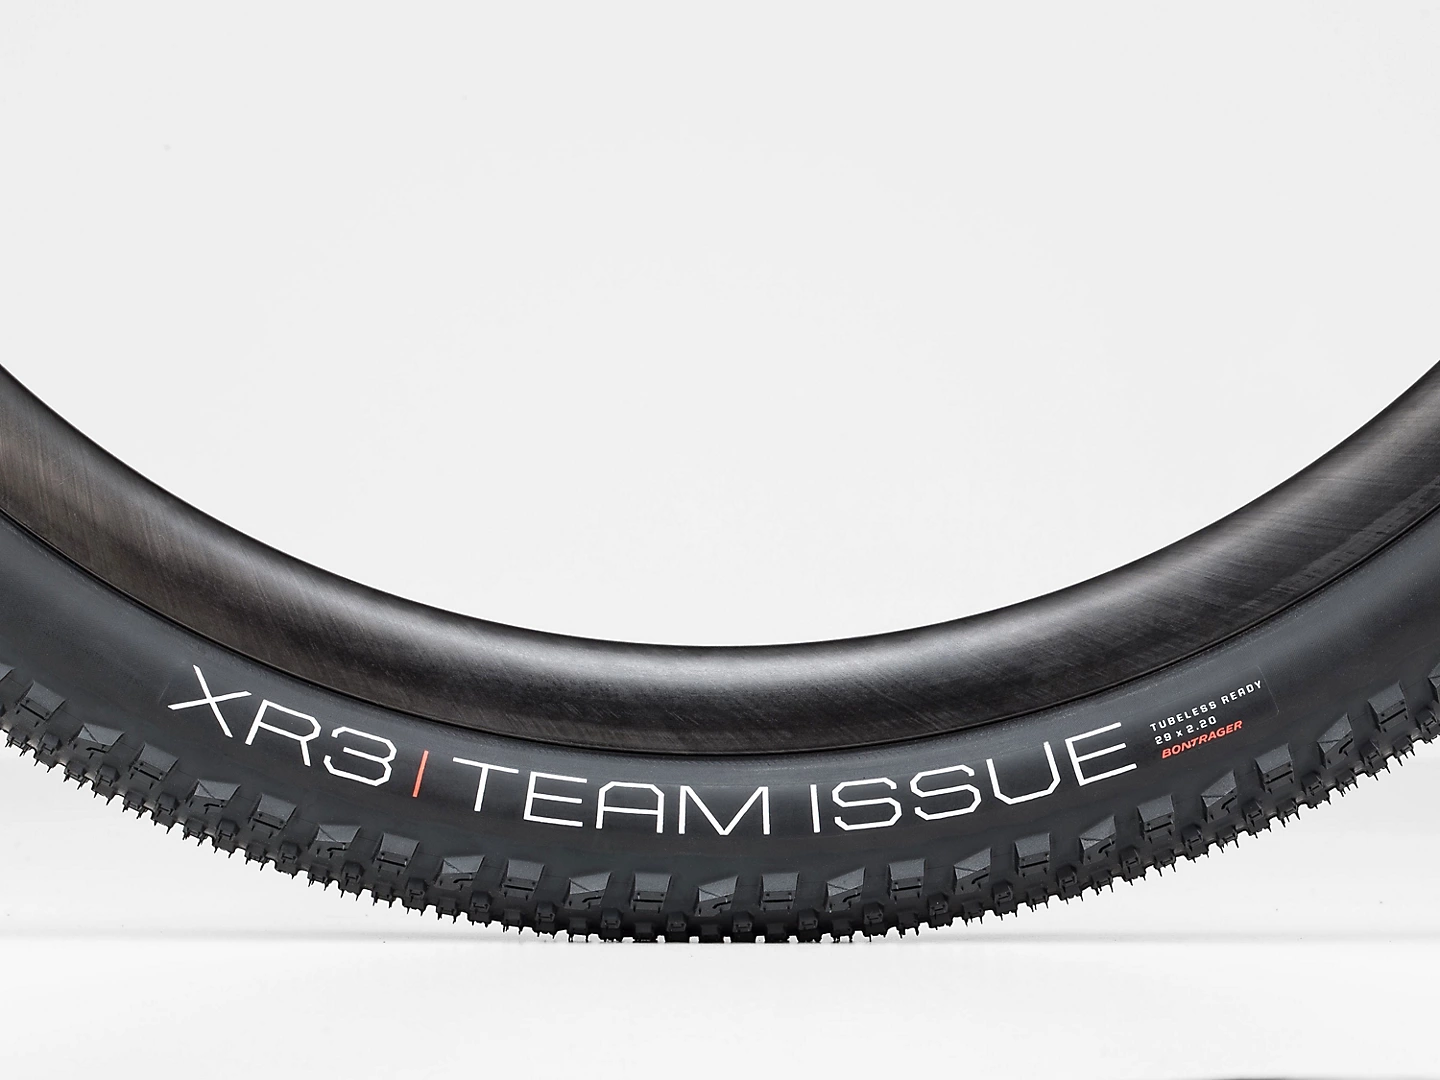 BONTRAGER XR3 Team Issue Tubeless Ready Tyre 29 x 2.4" click to zoom image